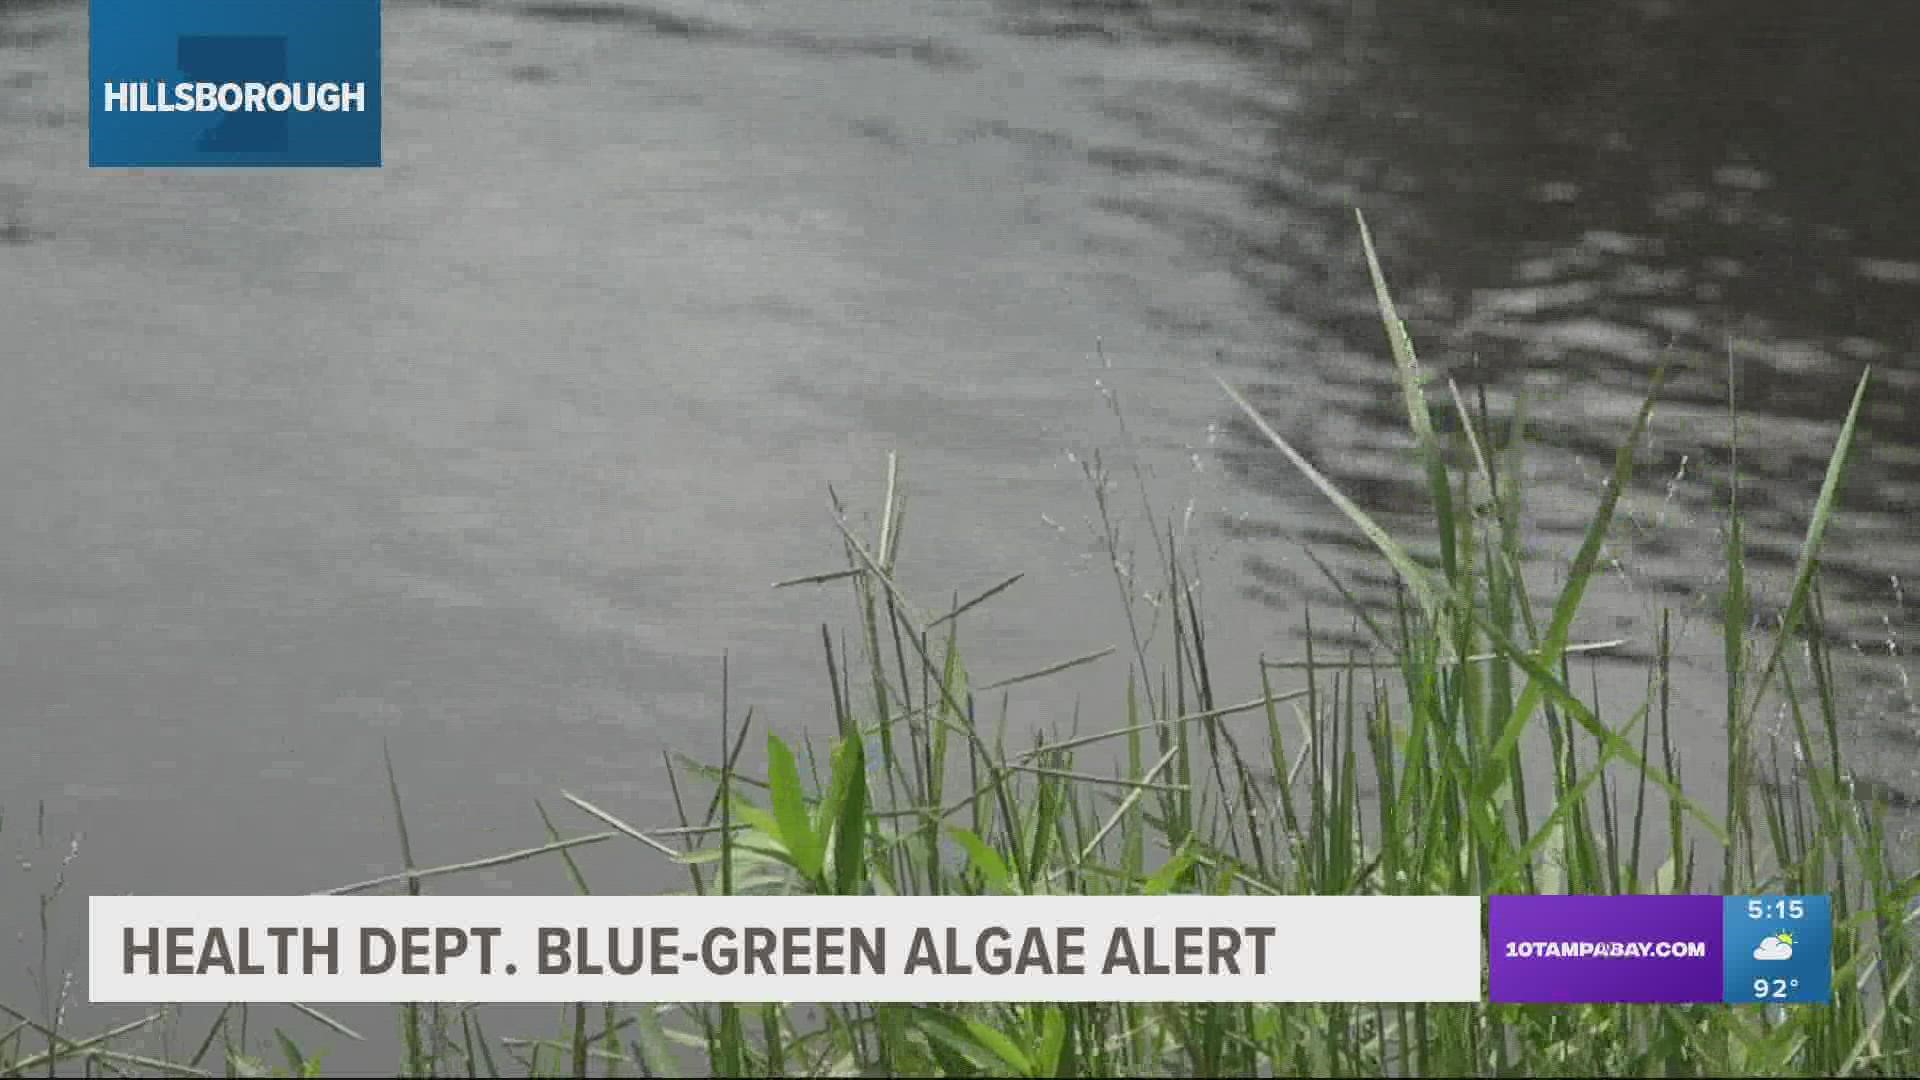 Health officials advise people to not swim in the water where bloom is visible.